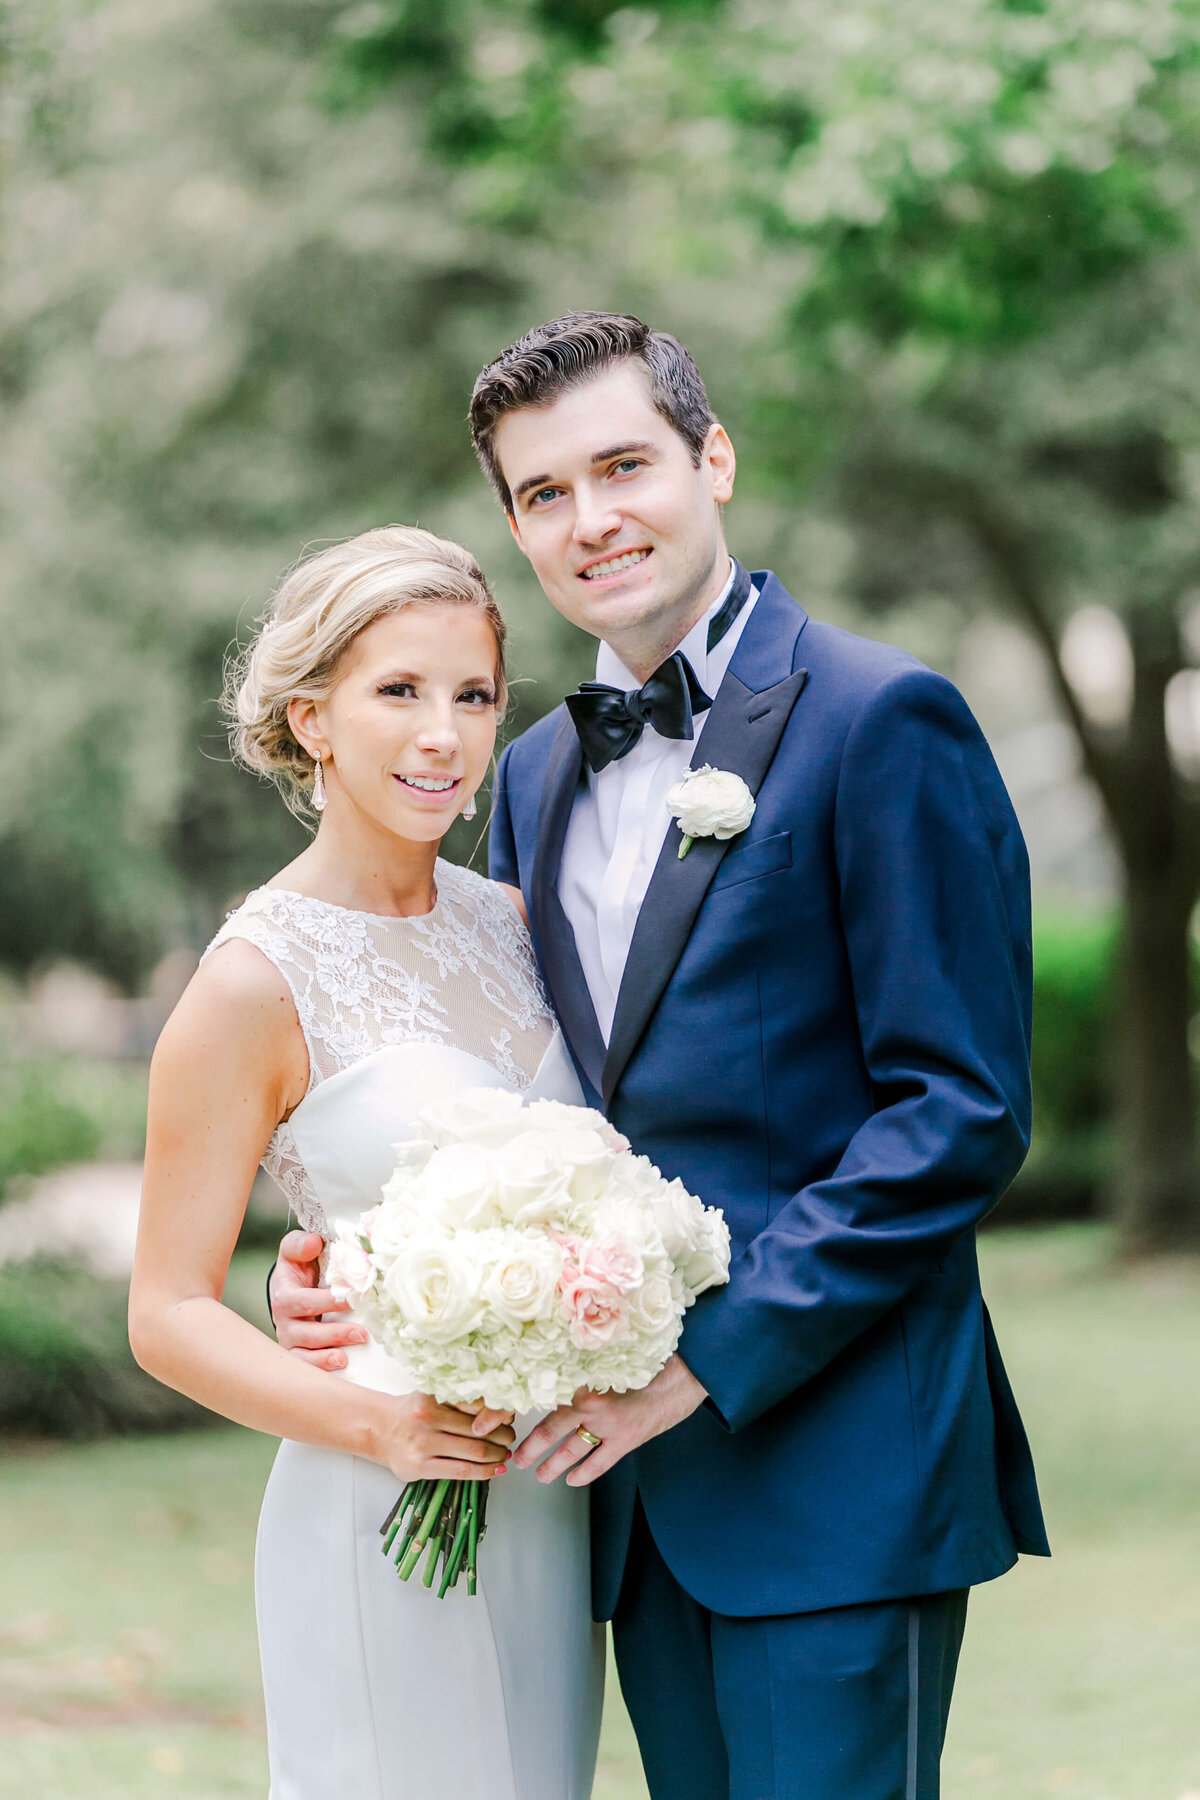 A beautiful bride with her white and soft pink flowers along with her handsome groom stand together for a close up portrait in Forsyth Park, Savannah, GA.